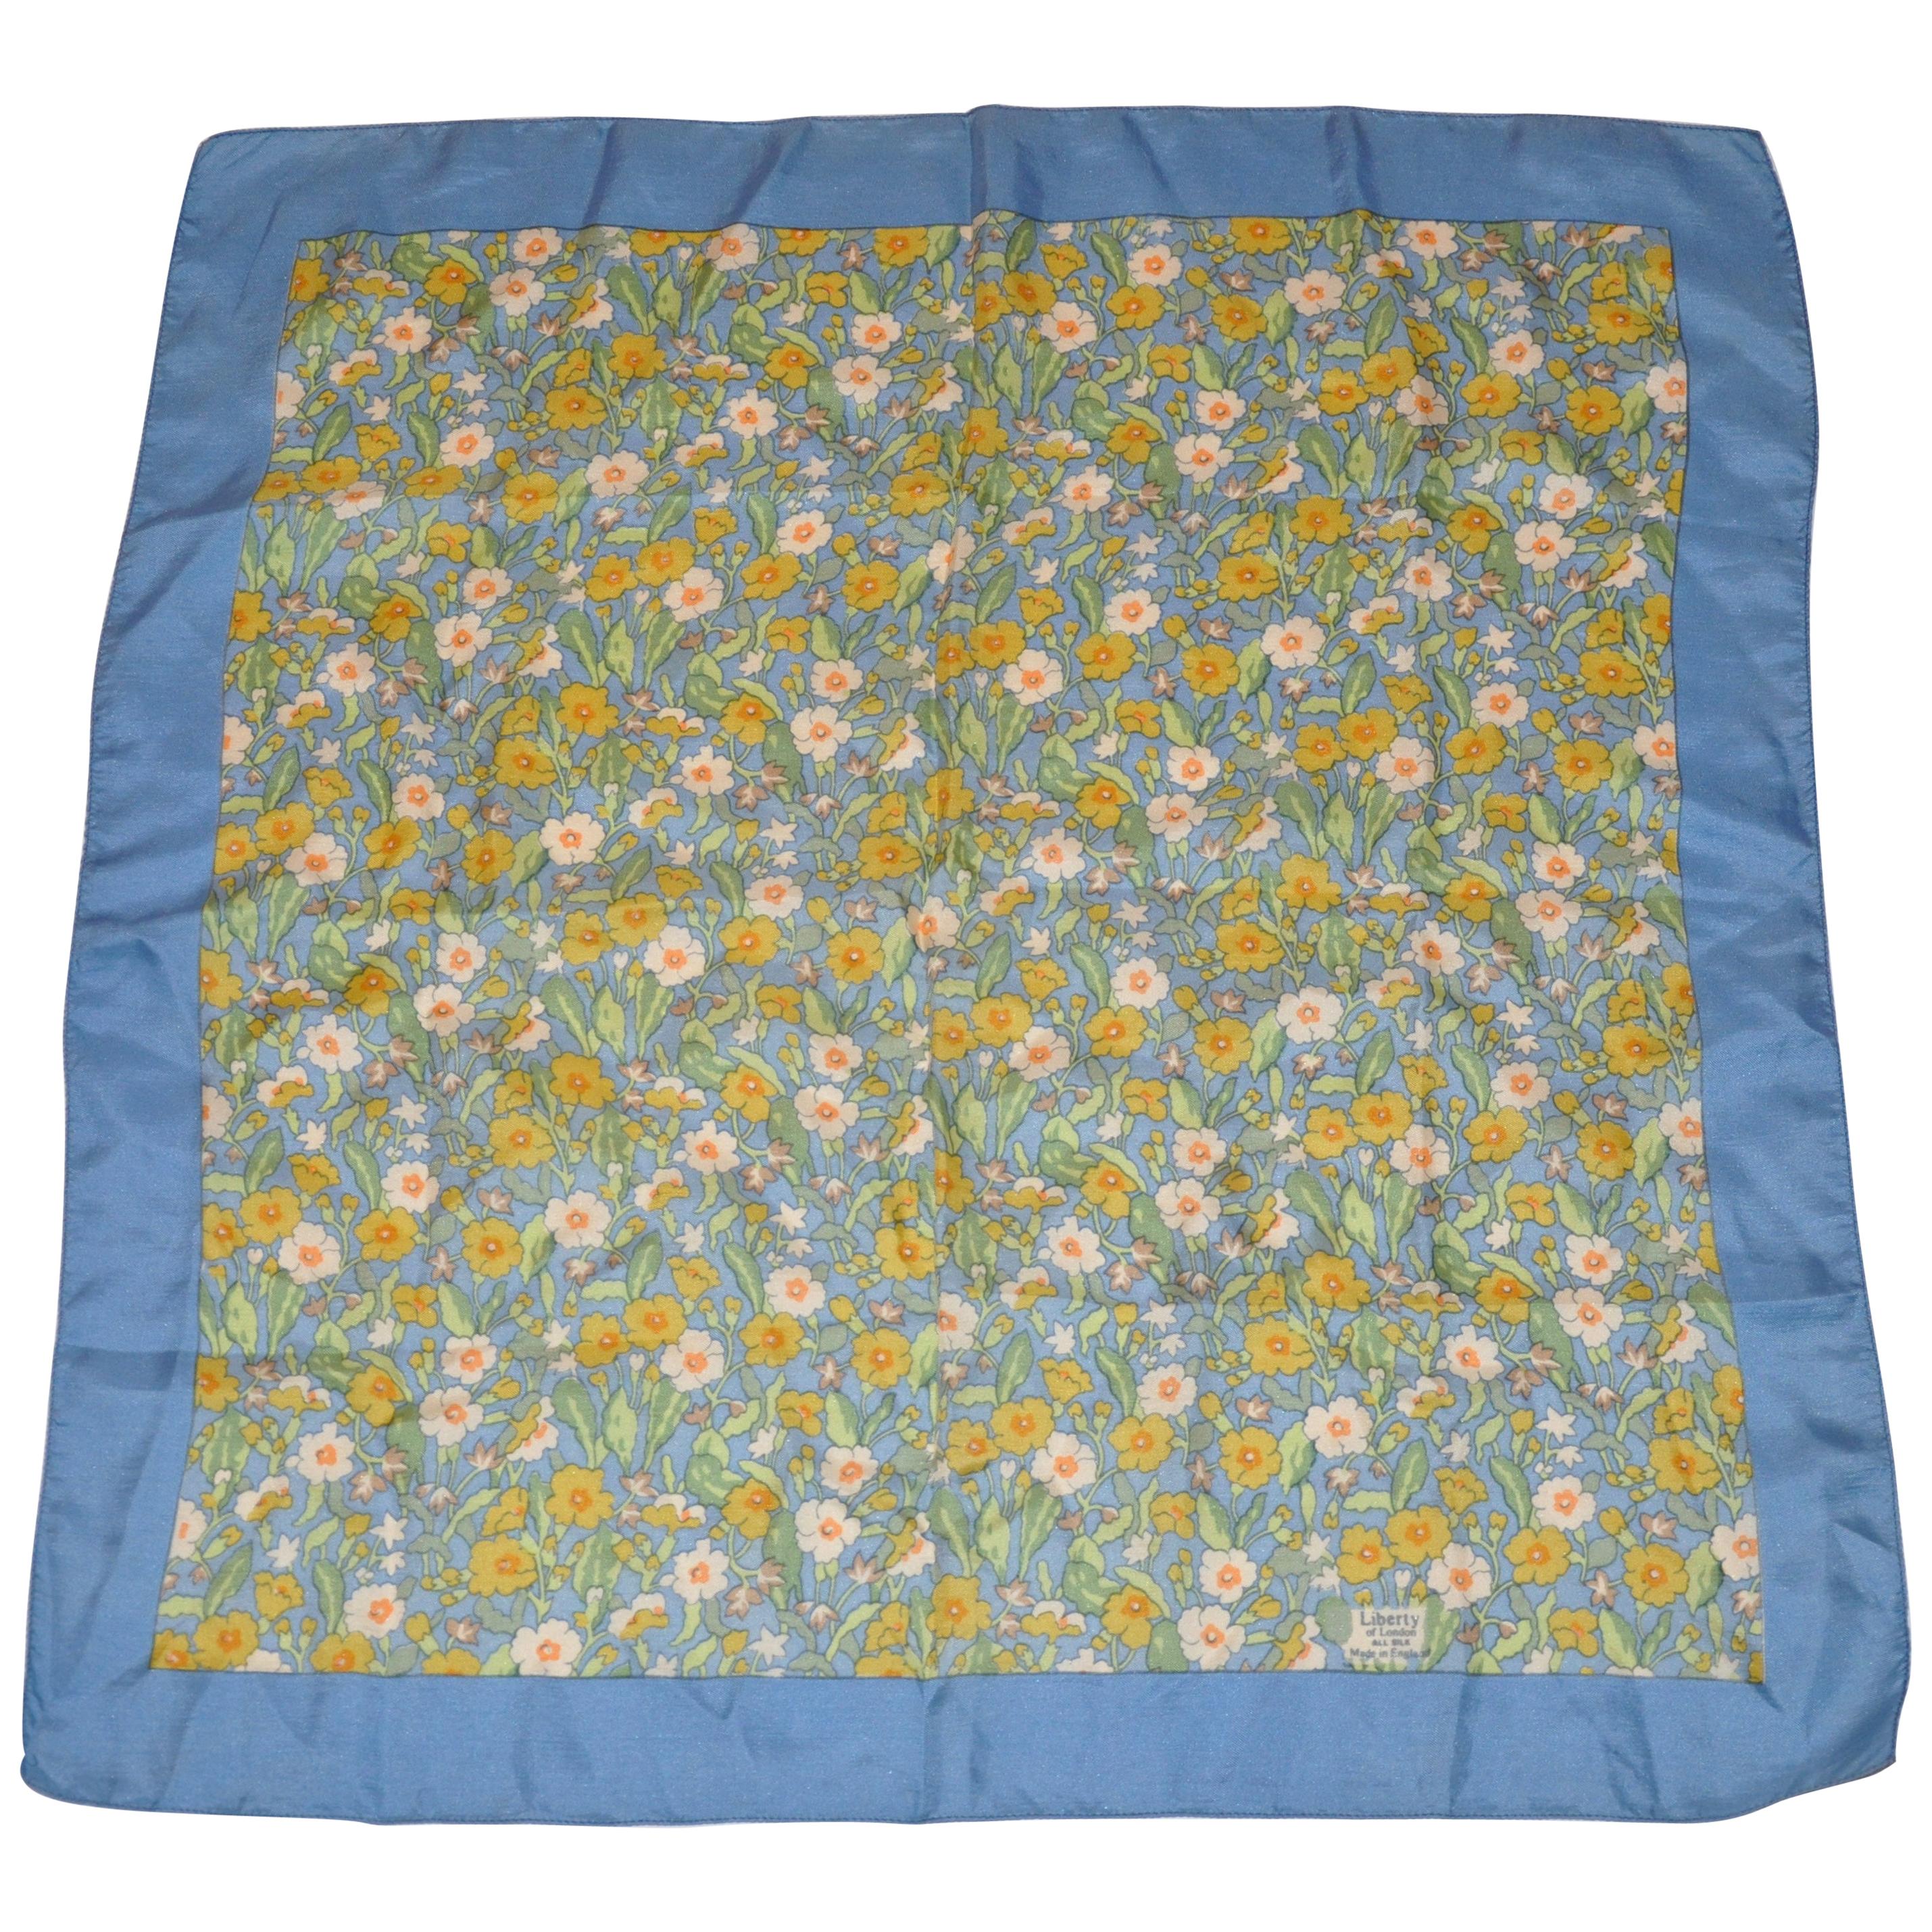 Liberty of London "Fields of Florals" Blue Borders Silk Scarf